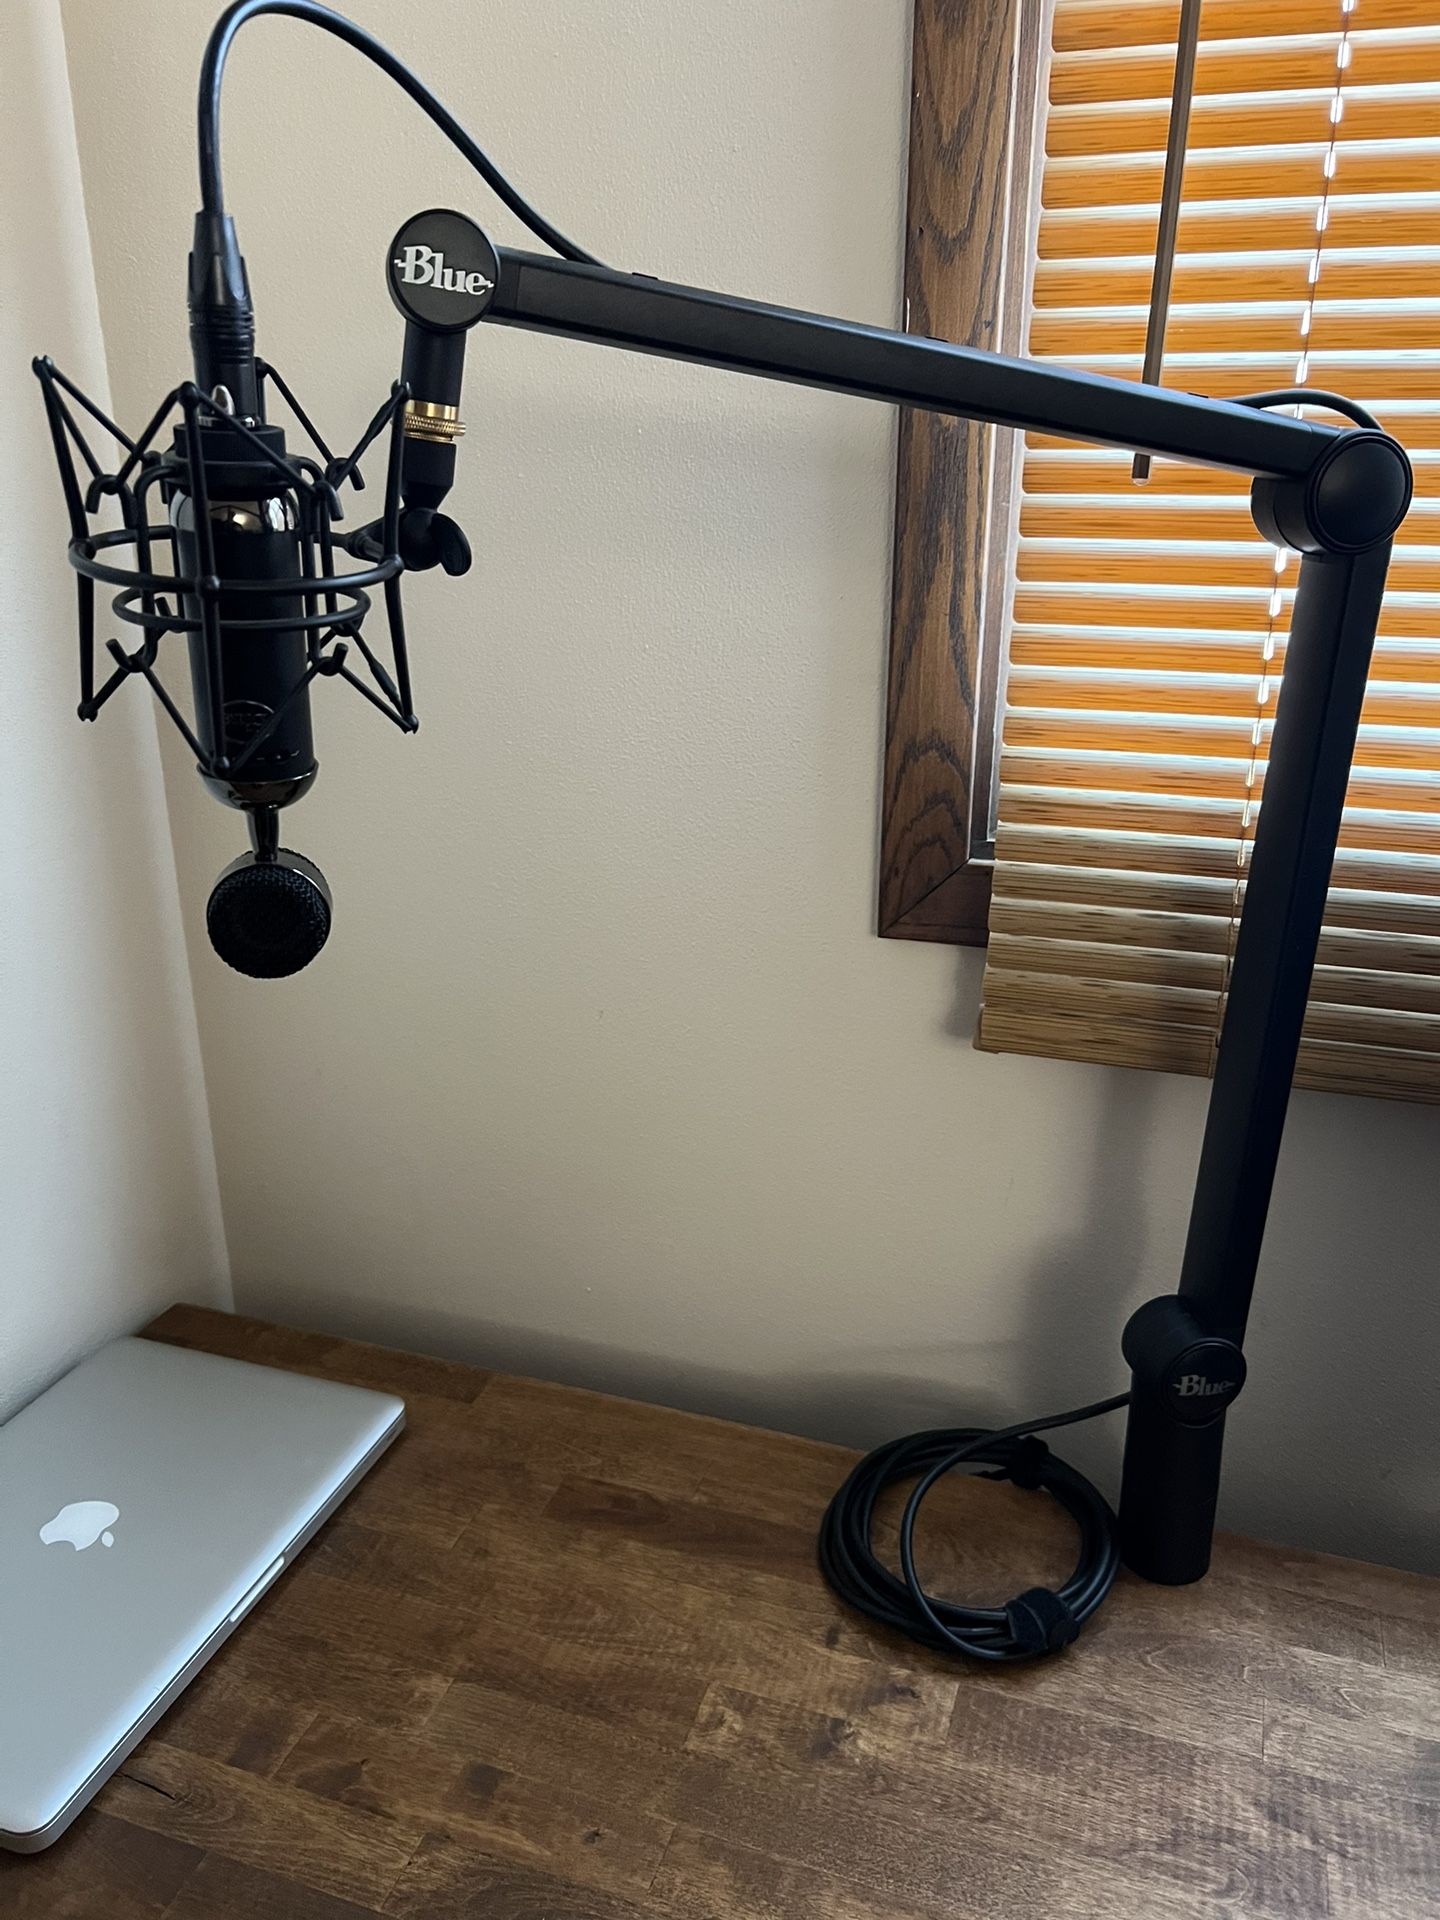 Blue Professional microphone and stand